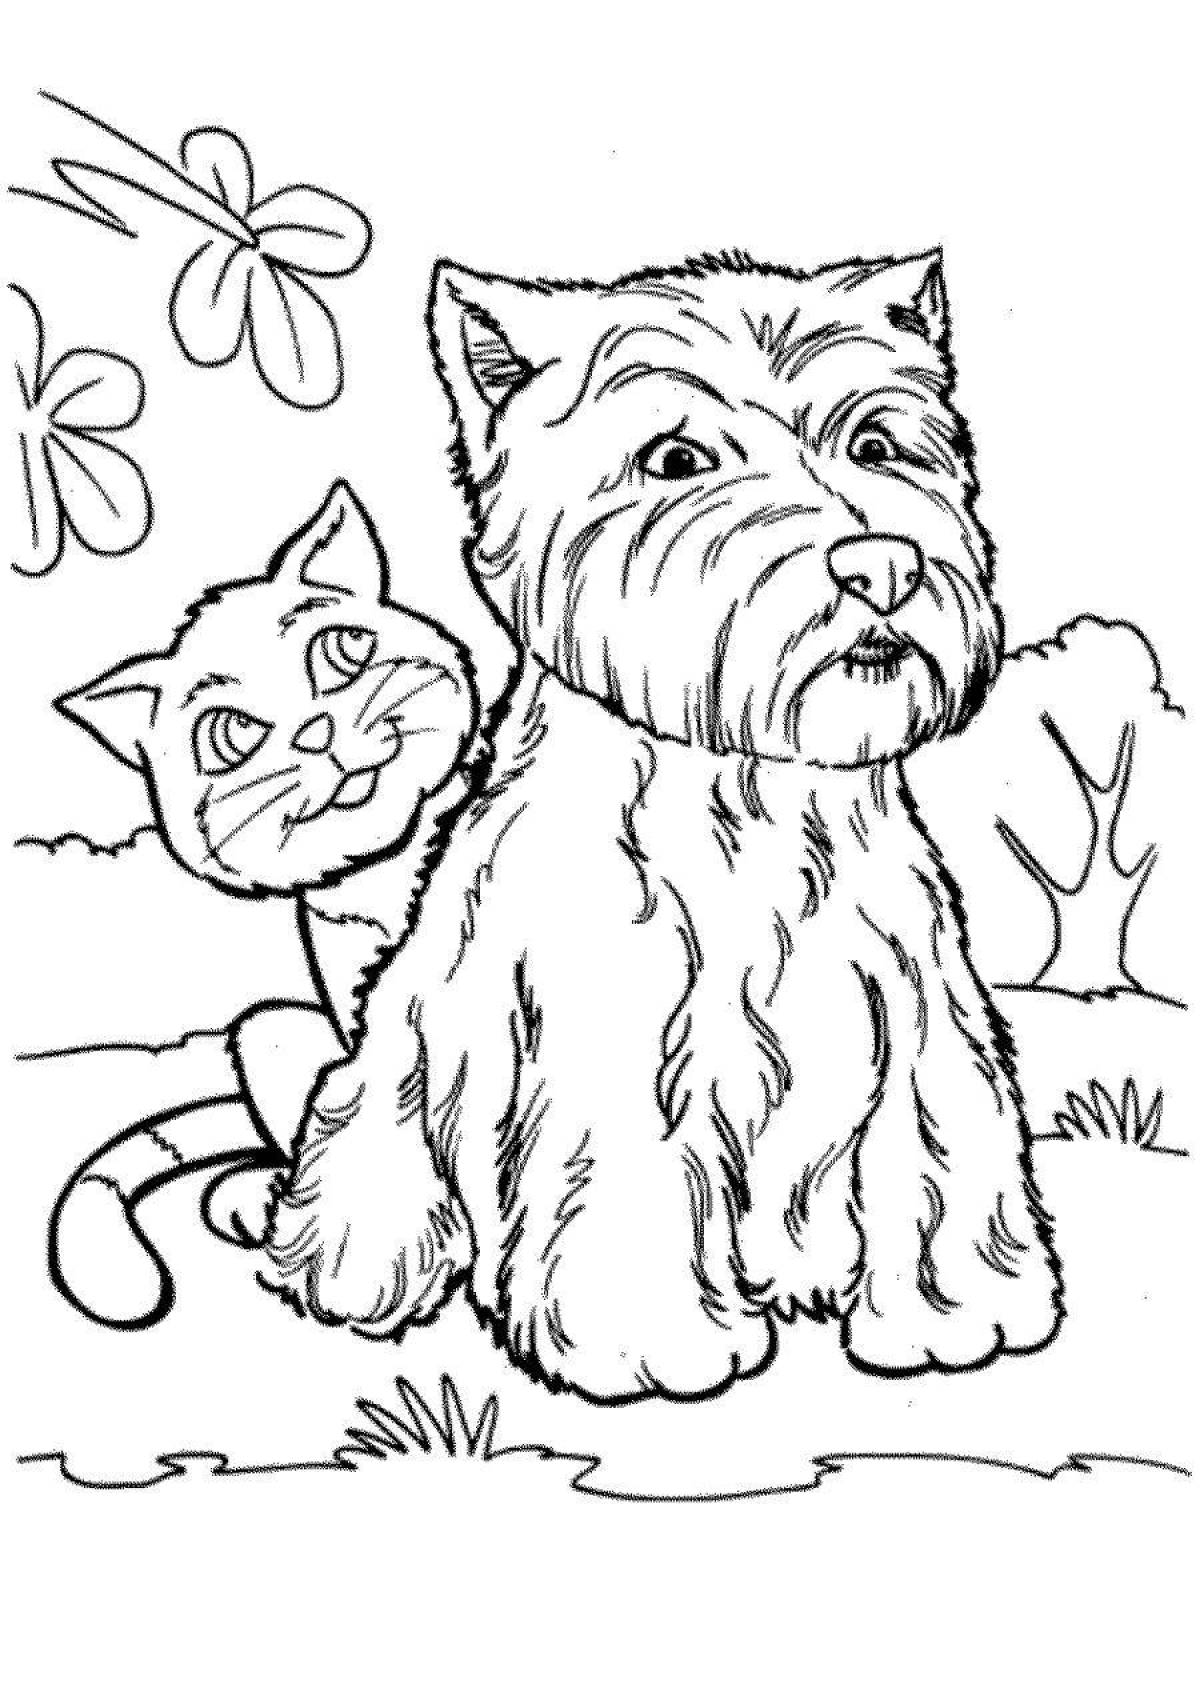 Bubble cat and dog together coloring book